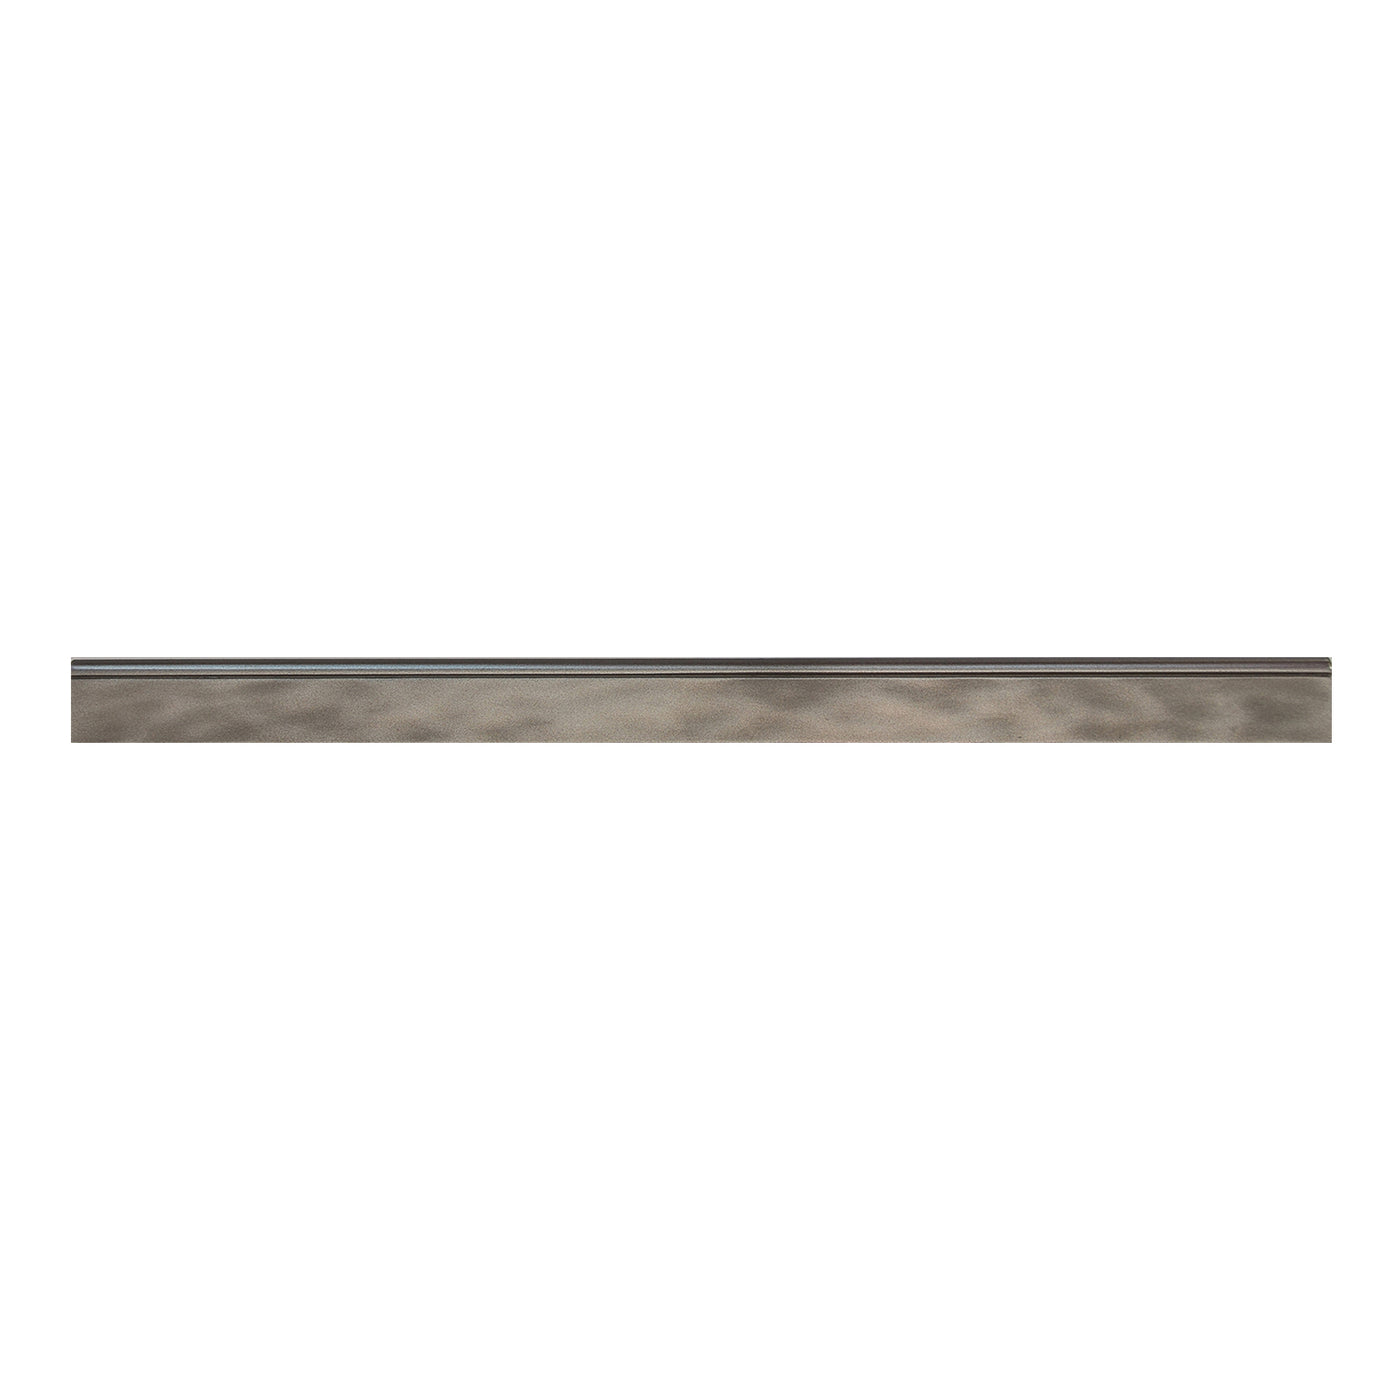 Questech City Scape Water 1" x 18" Metal Bullnose